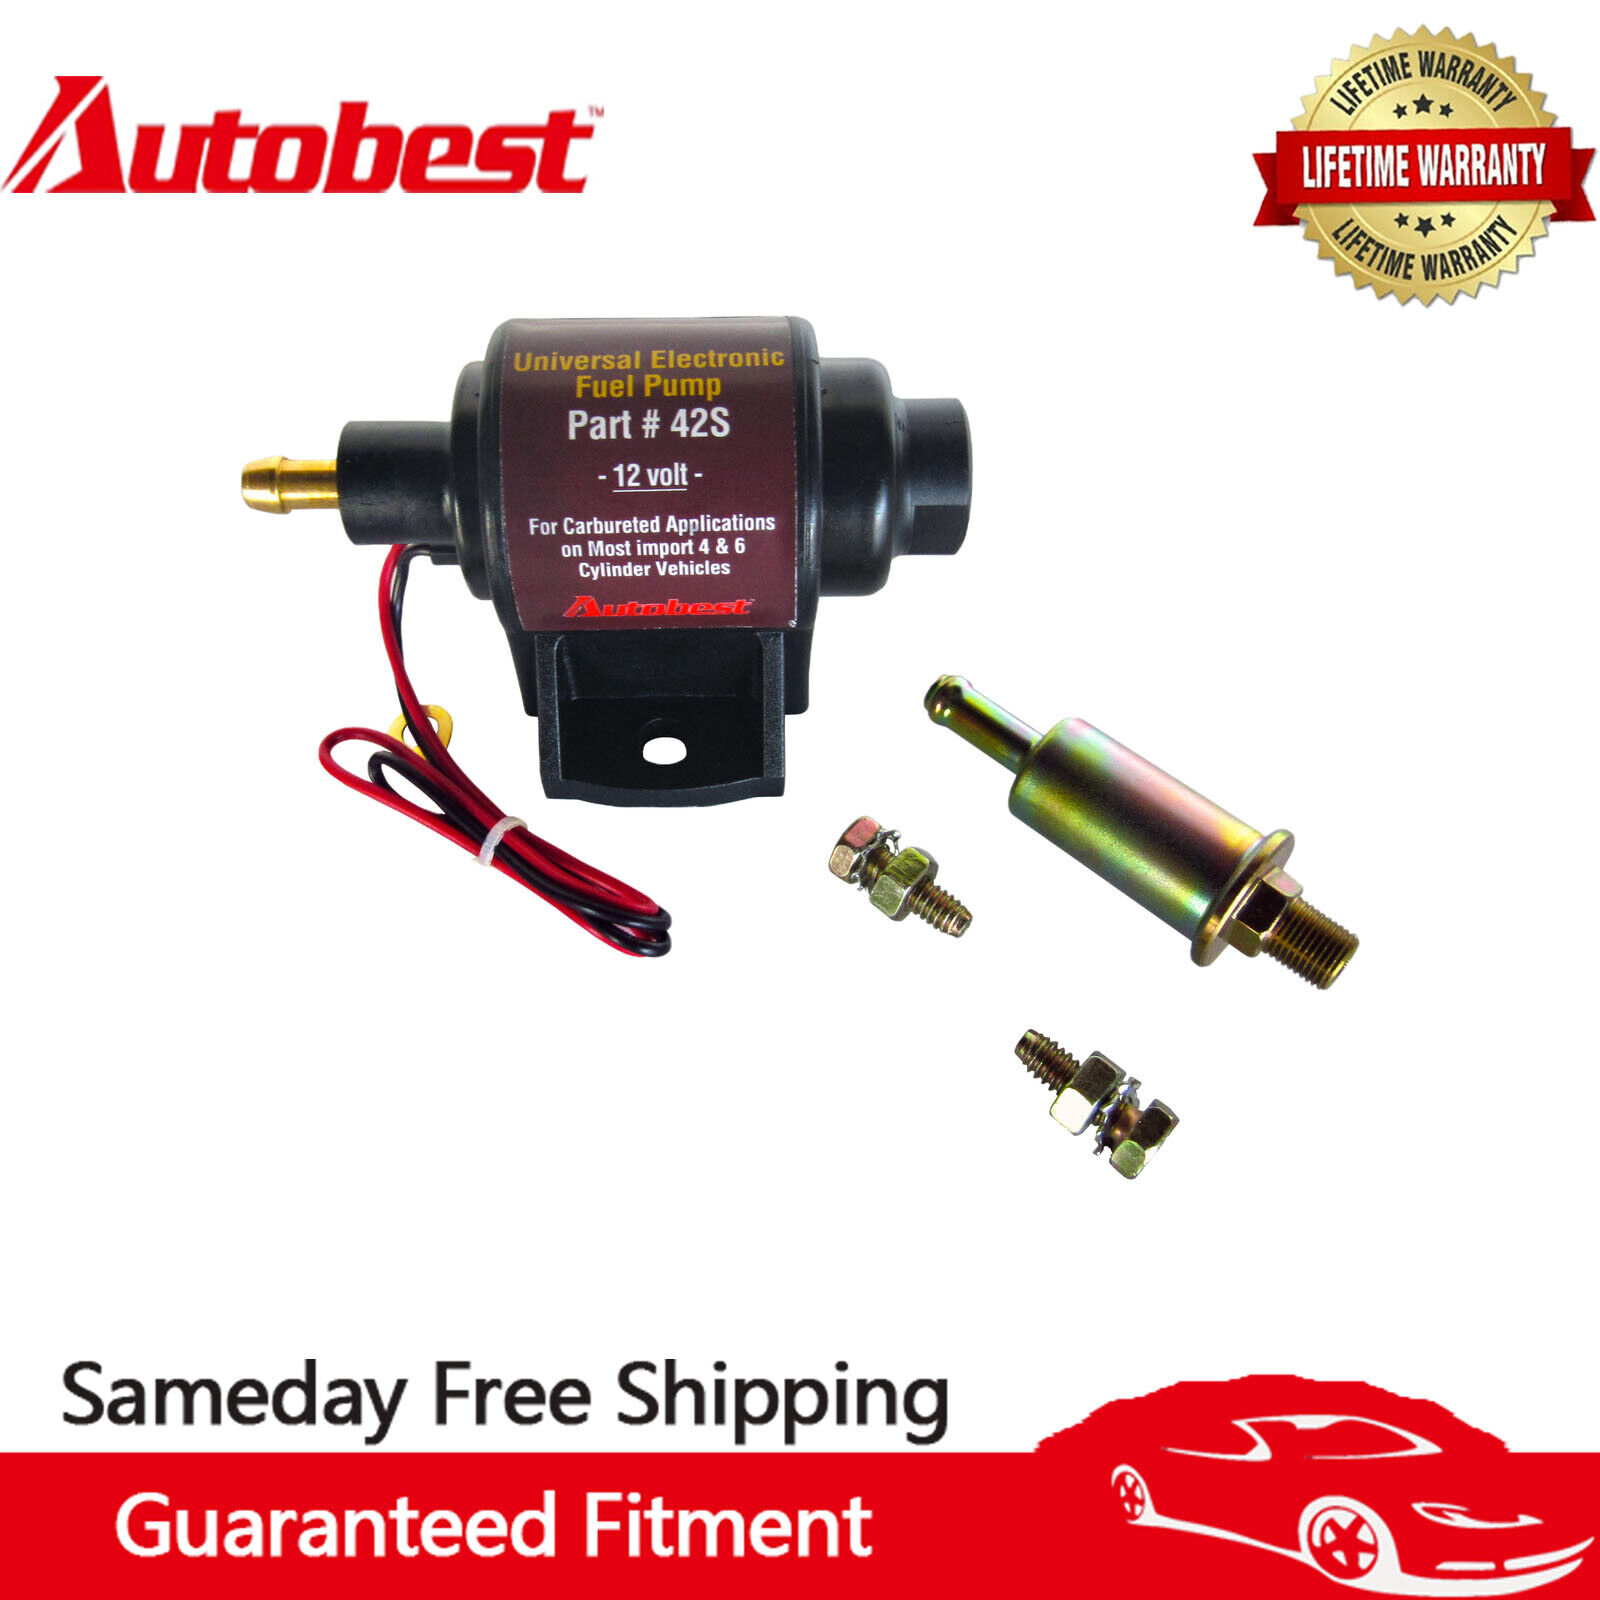 Autobest 42S Electric Transfer Pump For Low Pressure 2-3.5 PSI